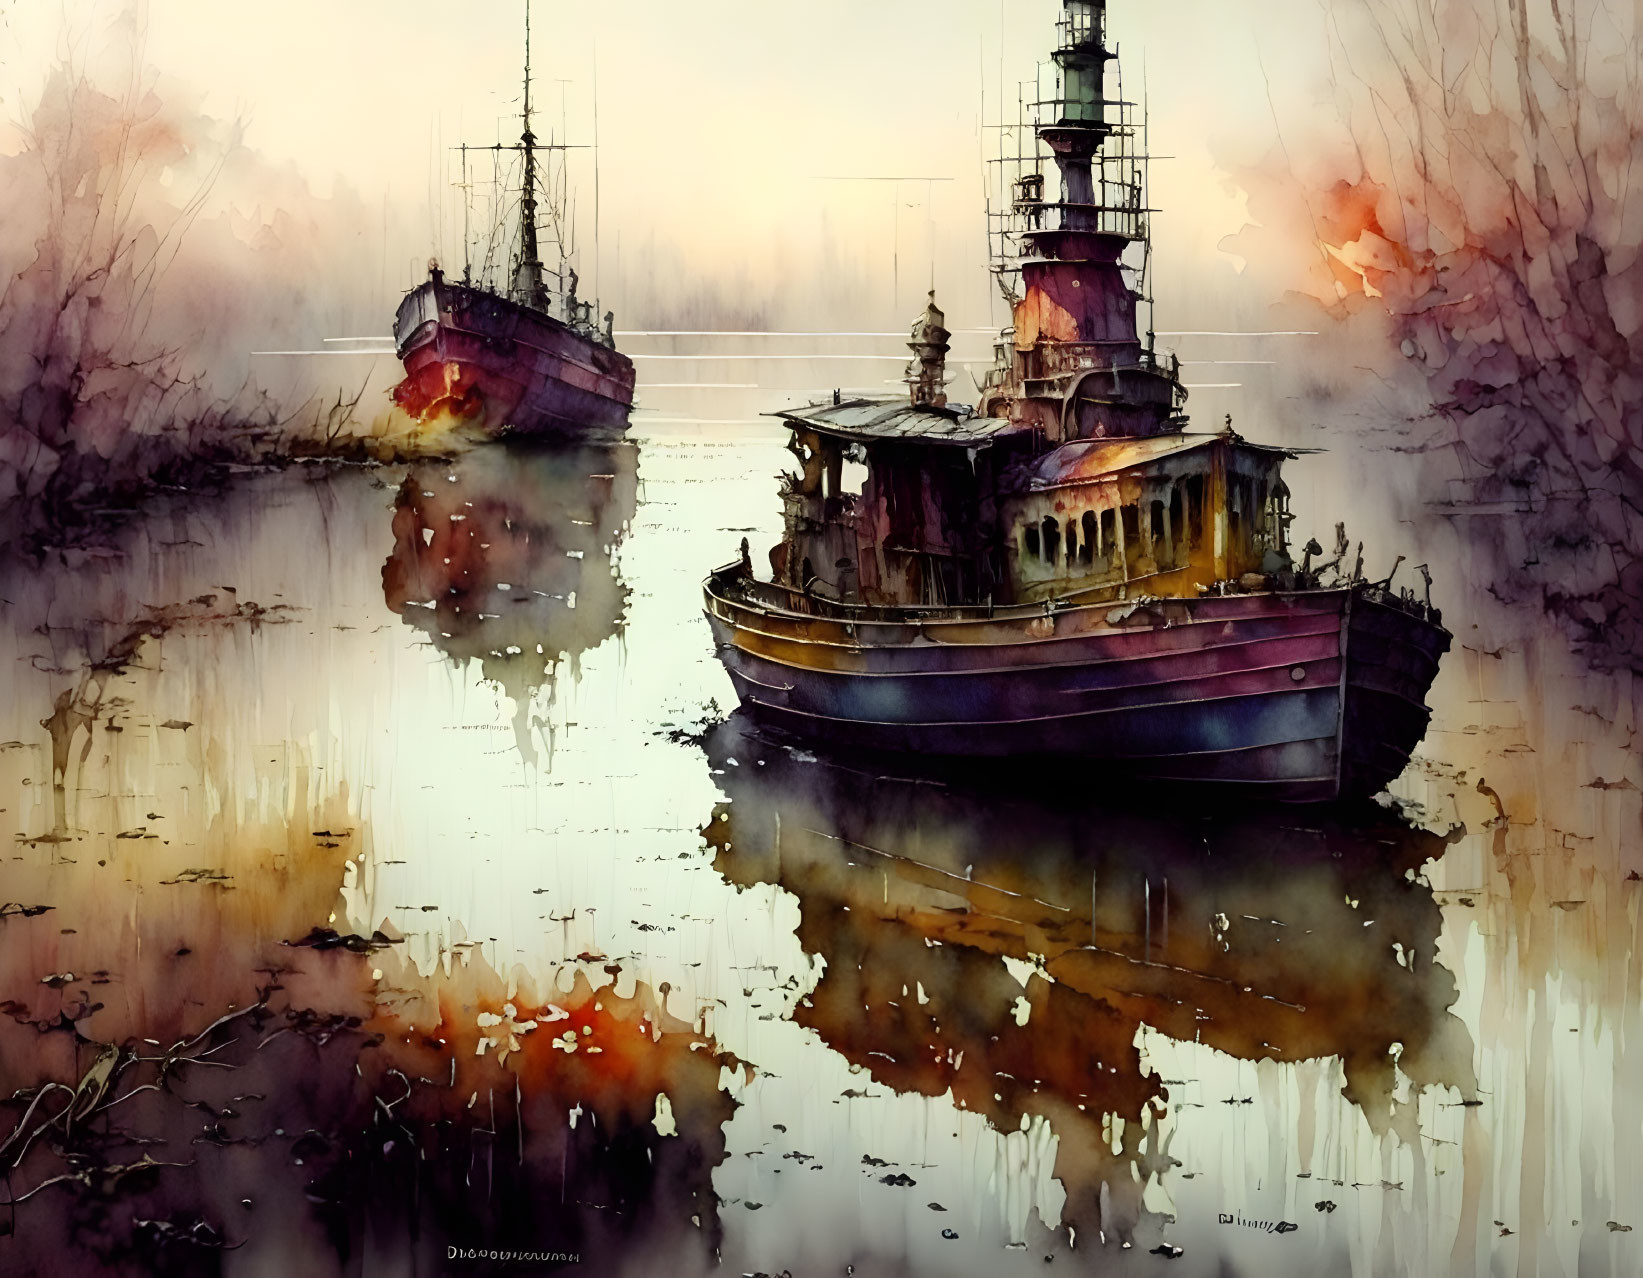 Vintage Ships Reflecting on Calm Water with Misty Autumn Trees